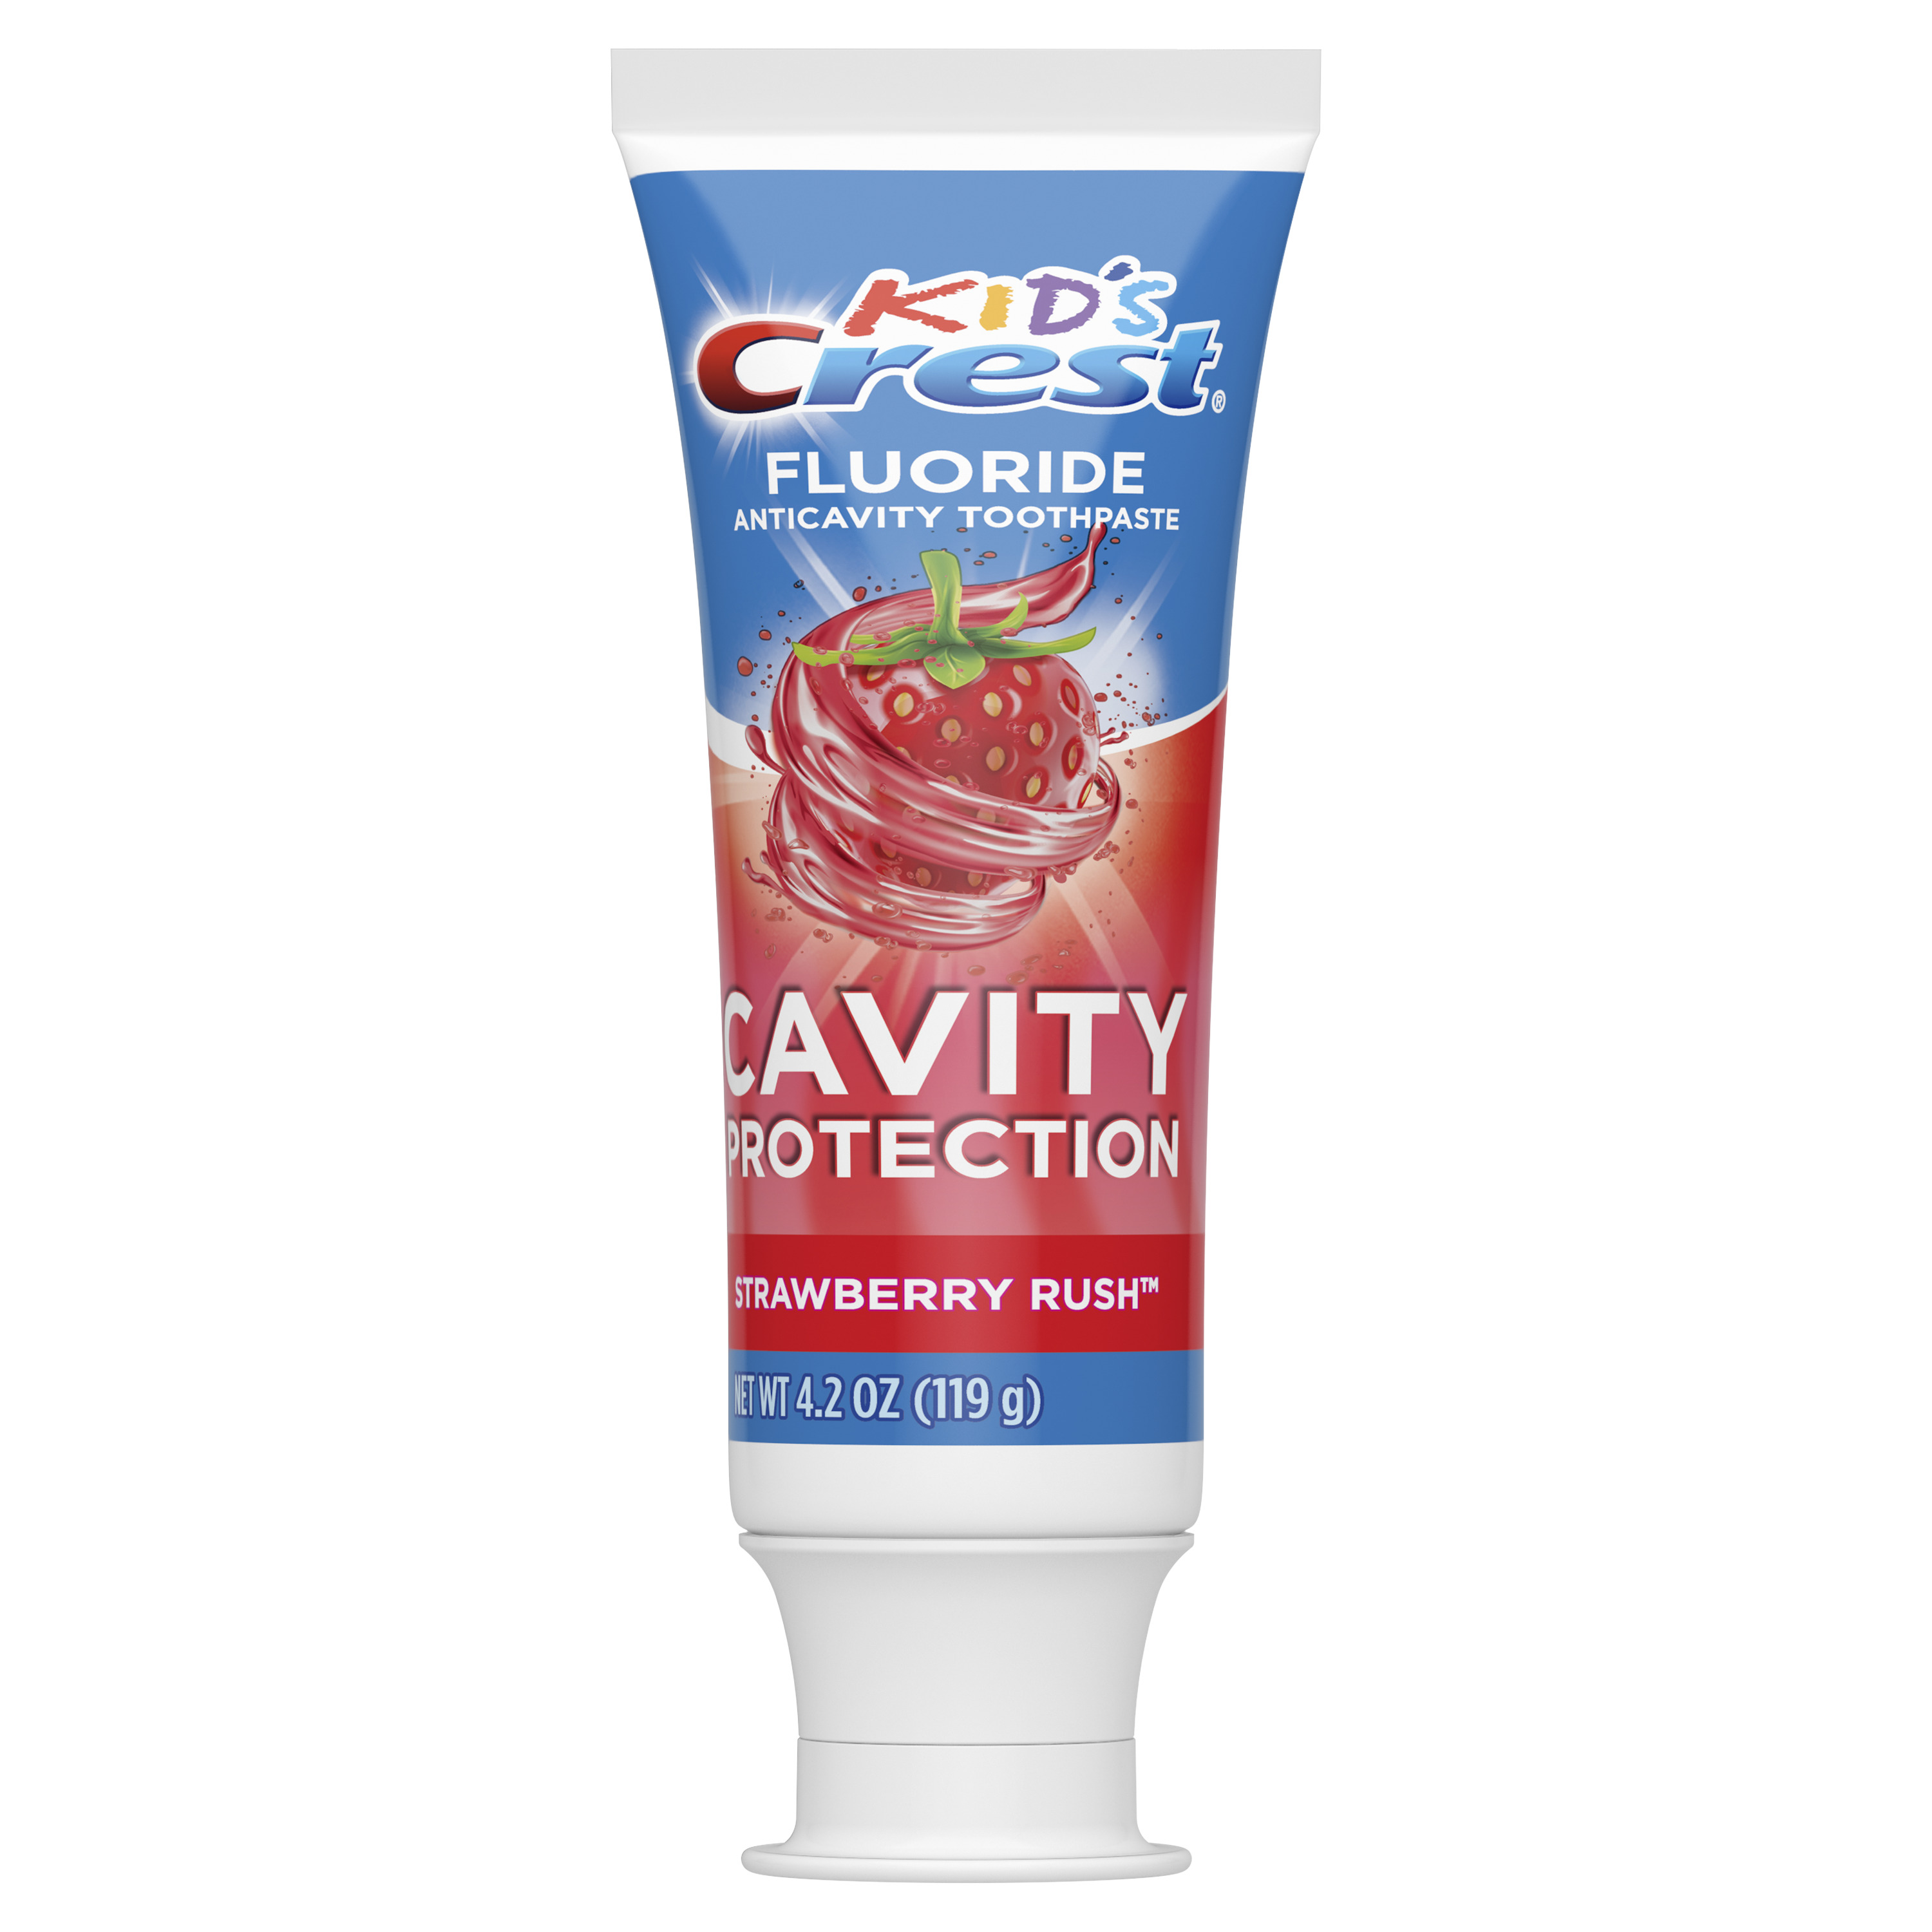 Crest Kid's Cavity Protection Fluoride Toothpaste, Strawberry Rush, 4.2 oz - image 6 of 6